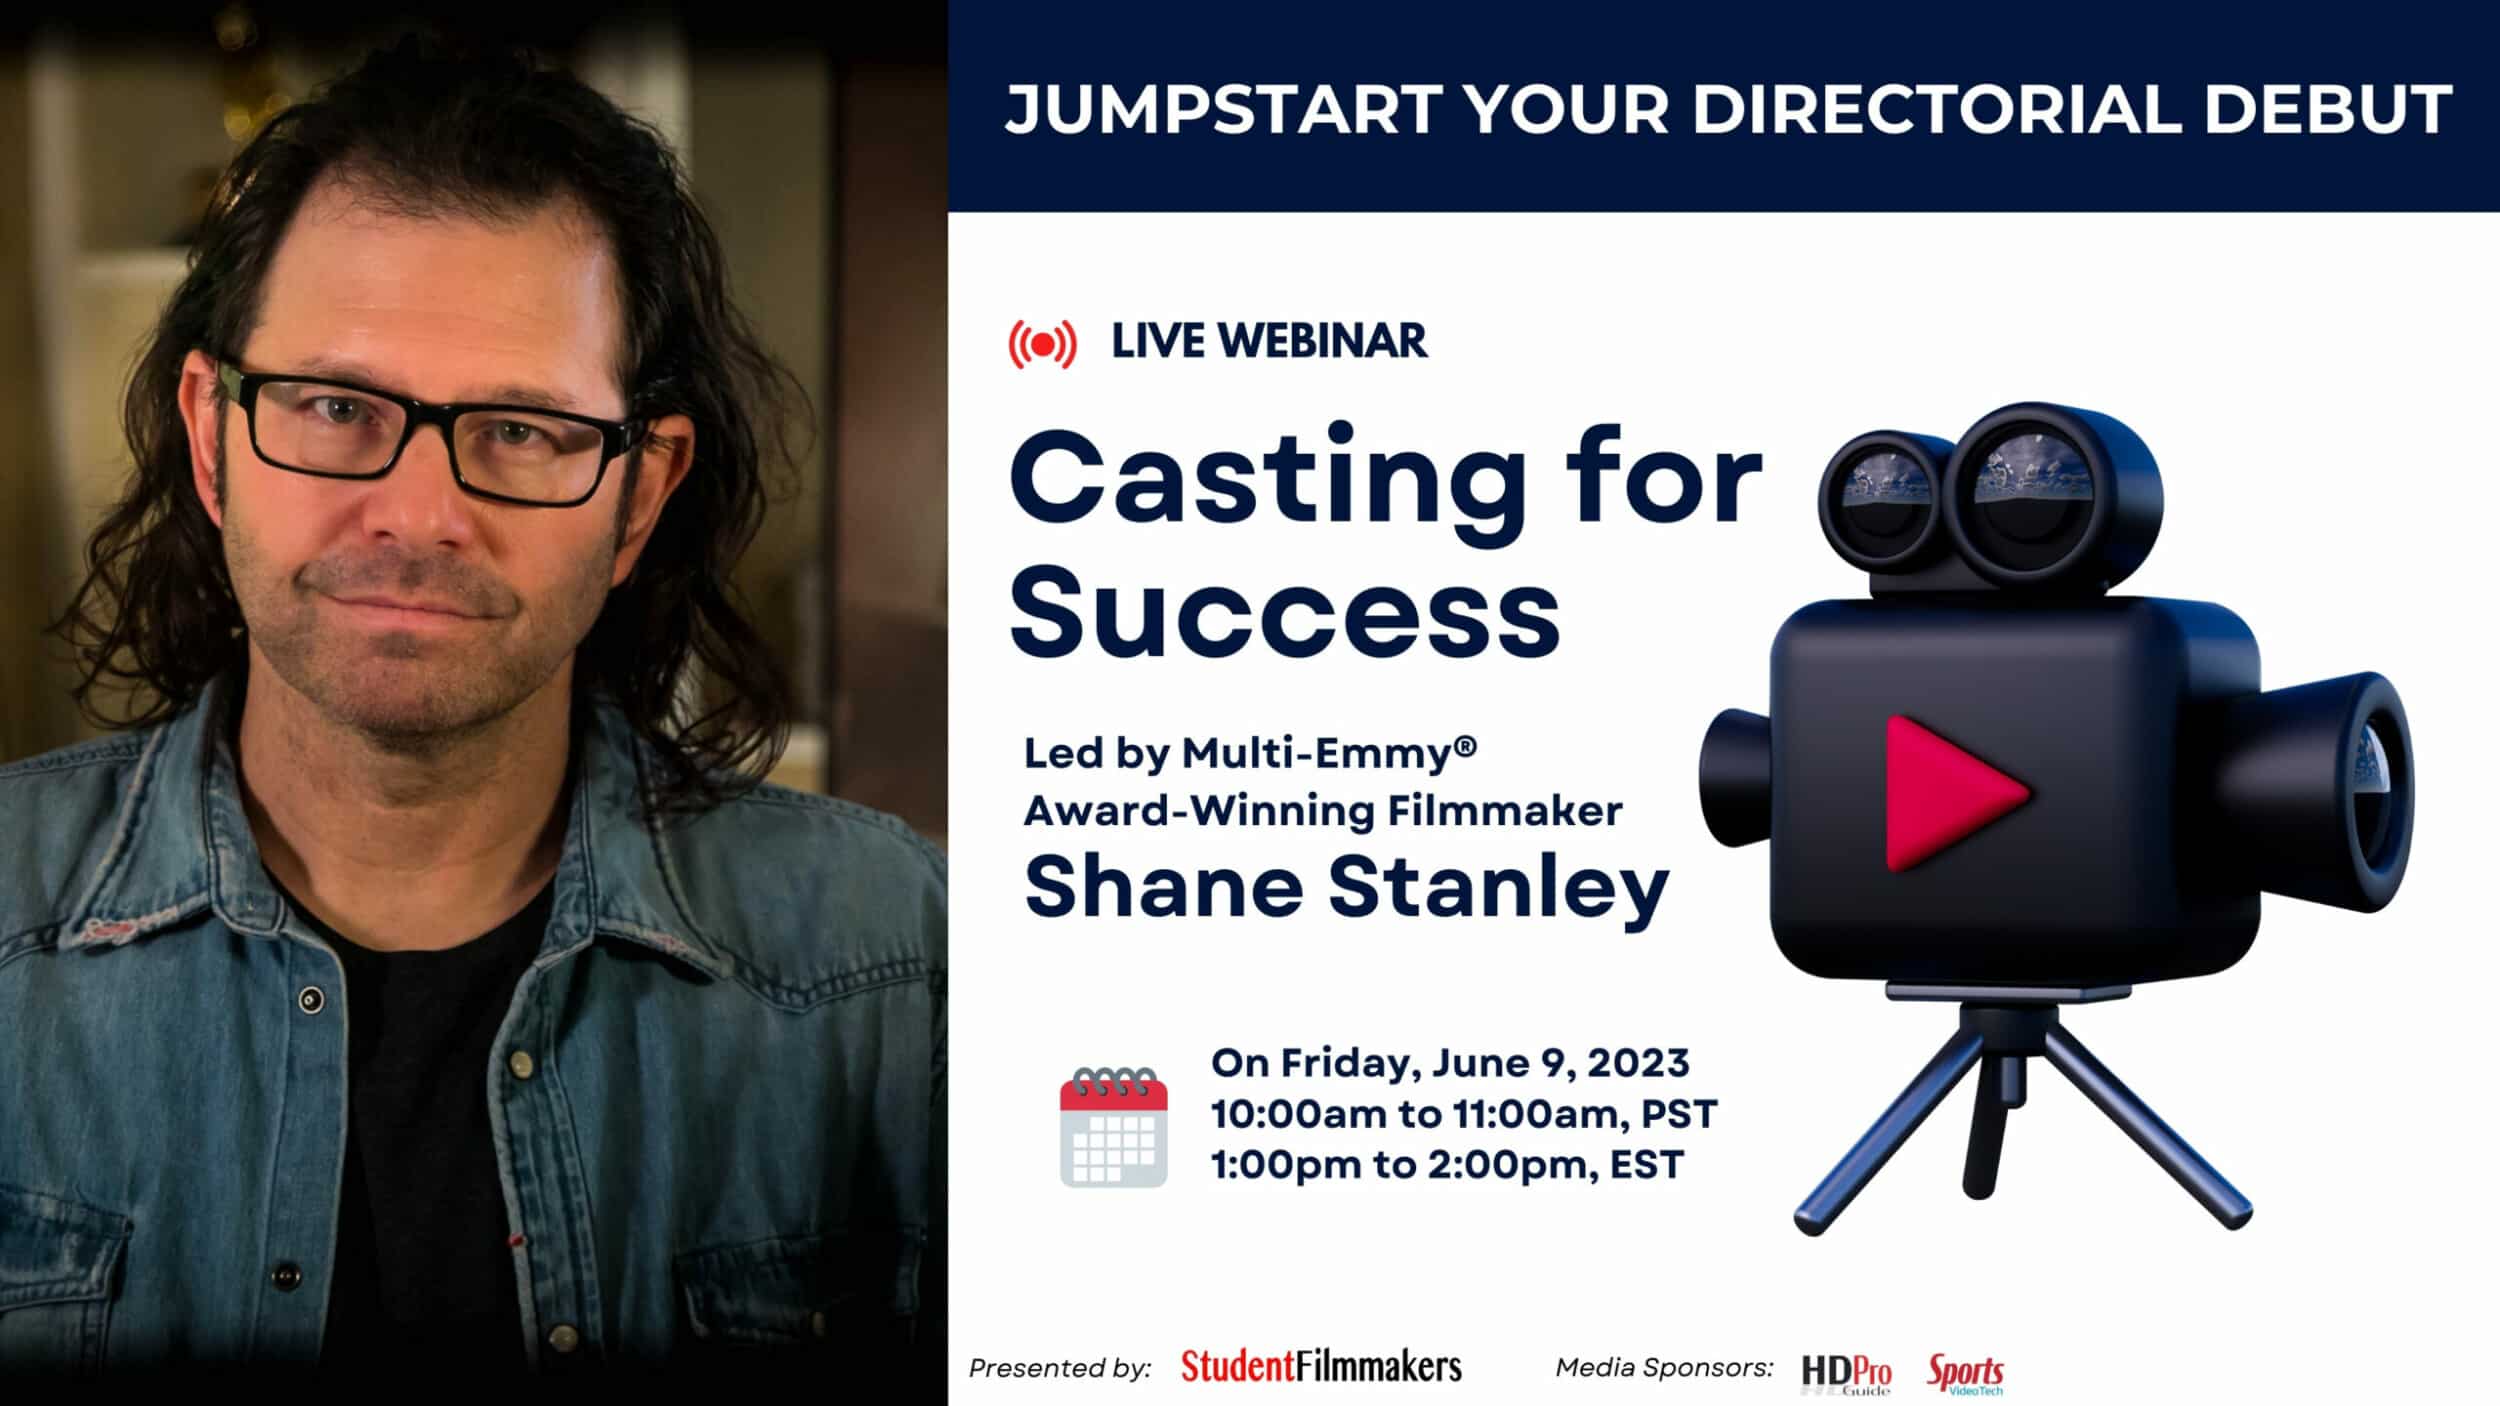 Jumpstart Your Directorial Debut: "Casting for Success" with Shane Stanley. Produced and hosted by StudentFilmmakers.com and Student Filmmakers Magazine